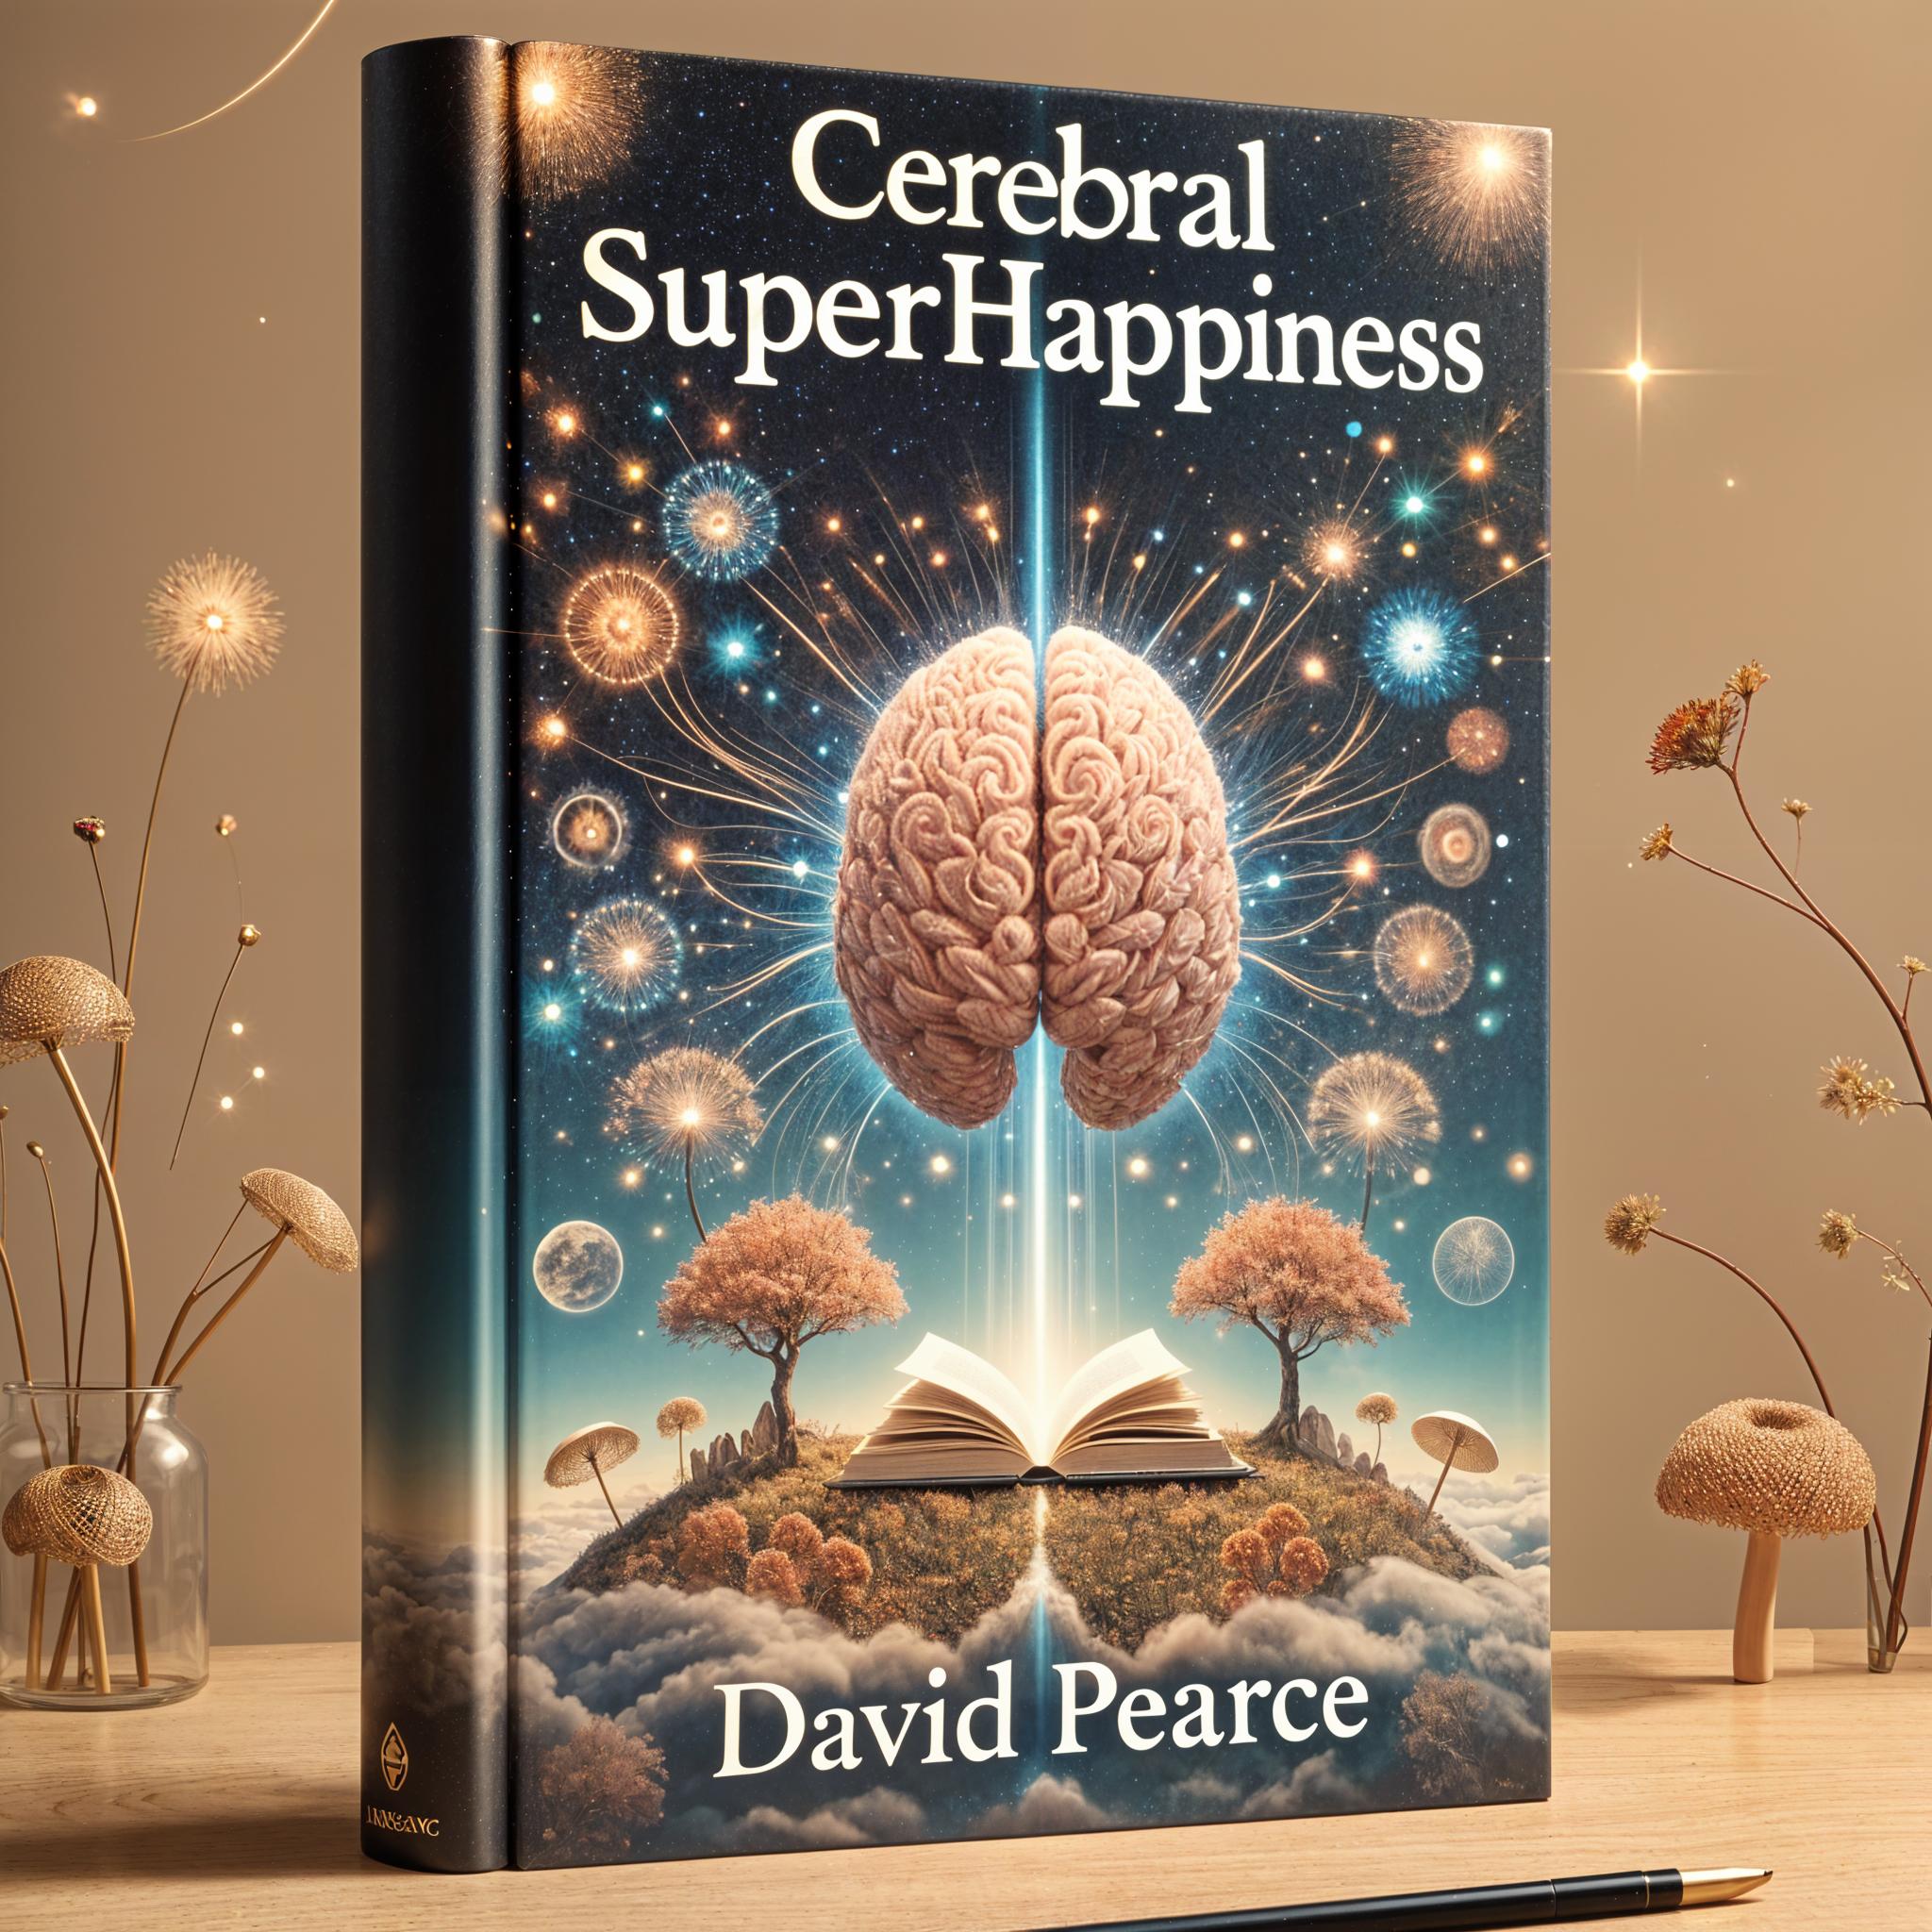 Cerebral Superhappiness by David Pearce